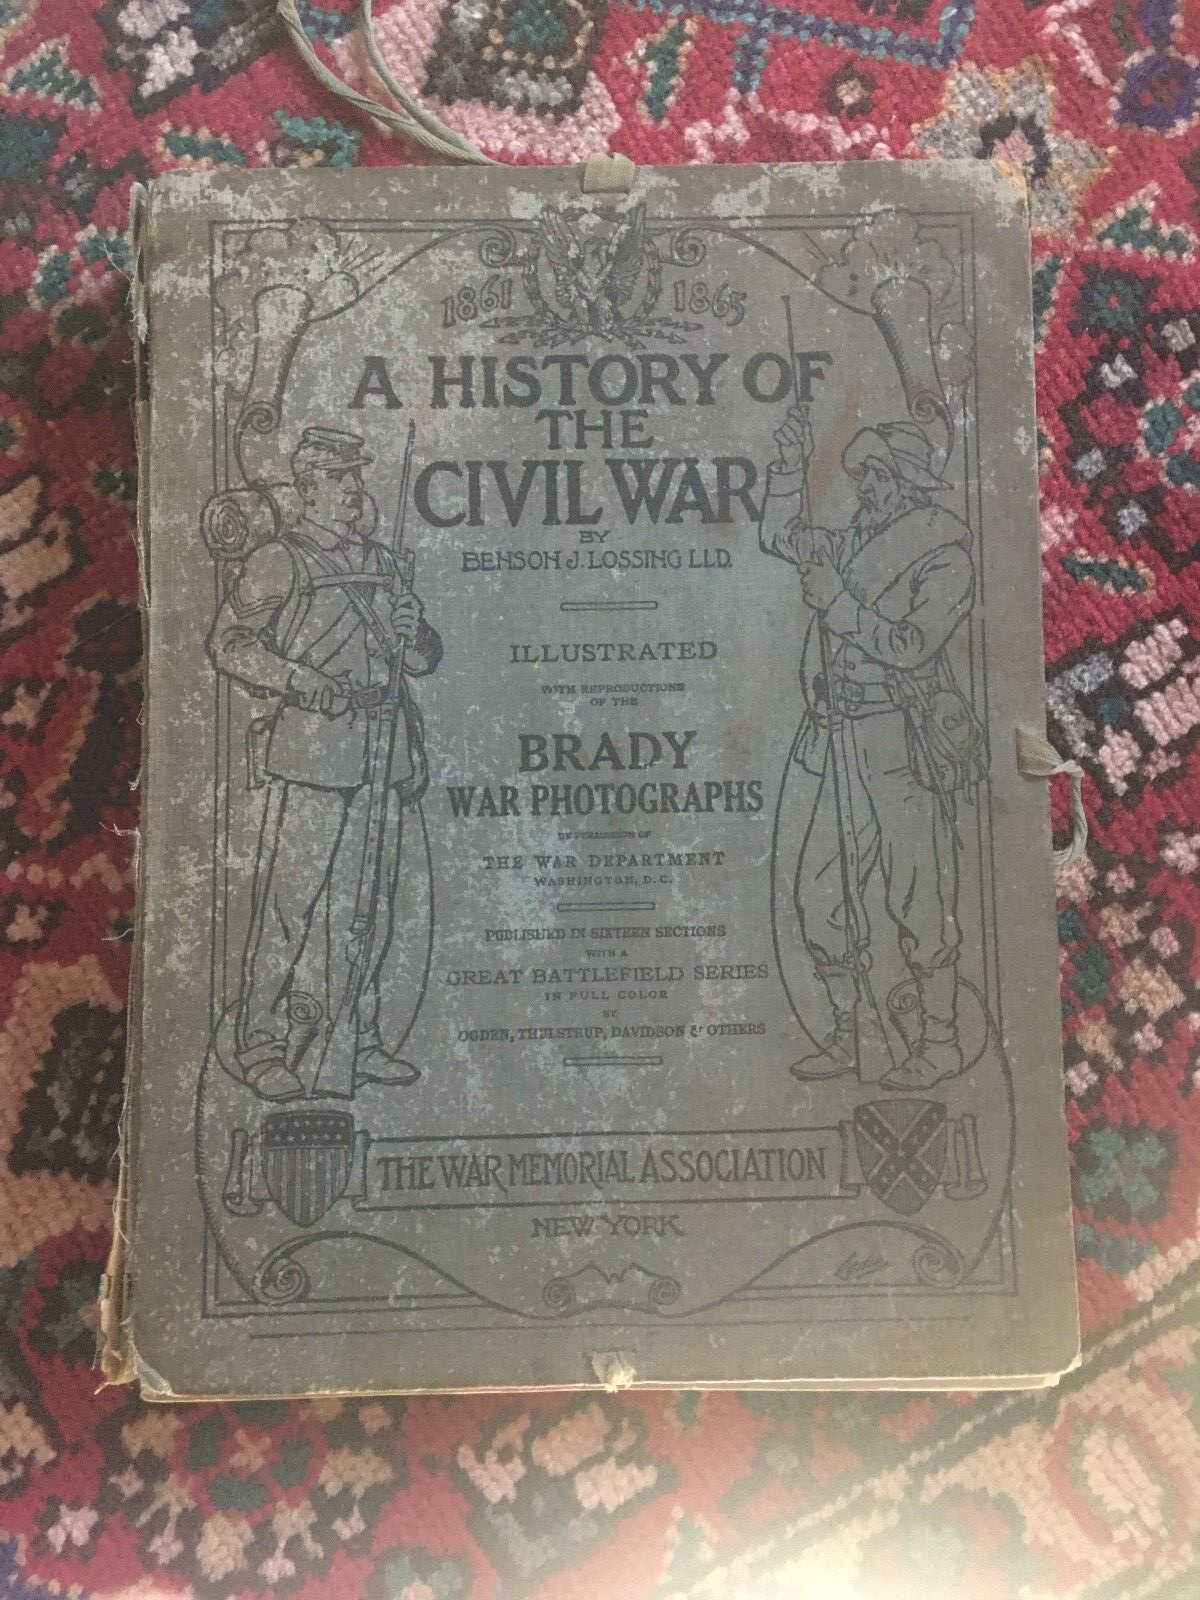 A History of the Civil War- llustrated Brady War Photographs Published in 16 sec